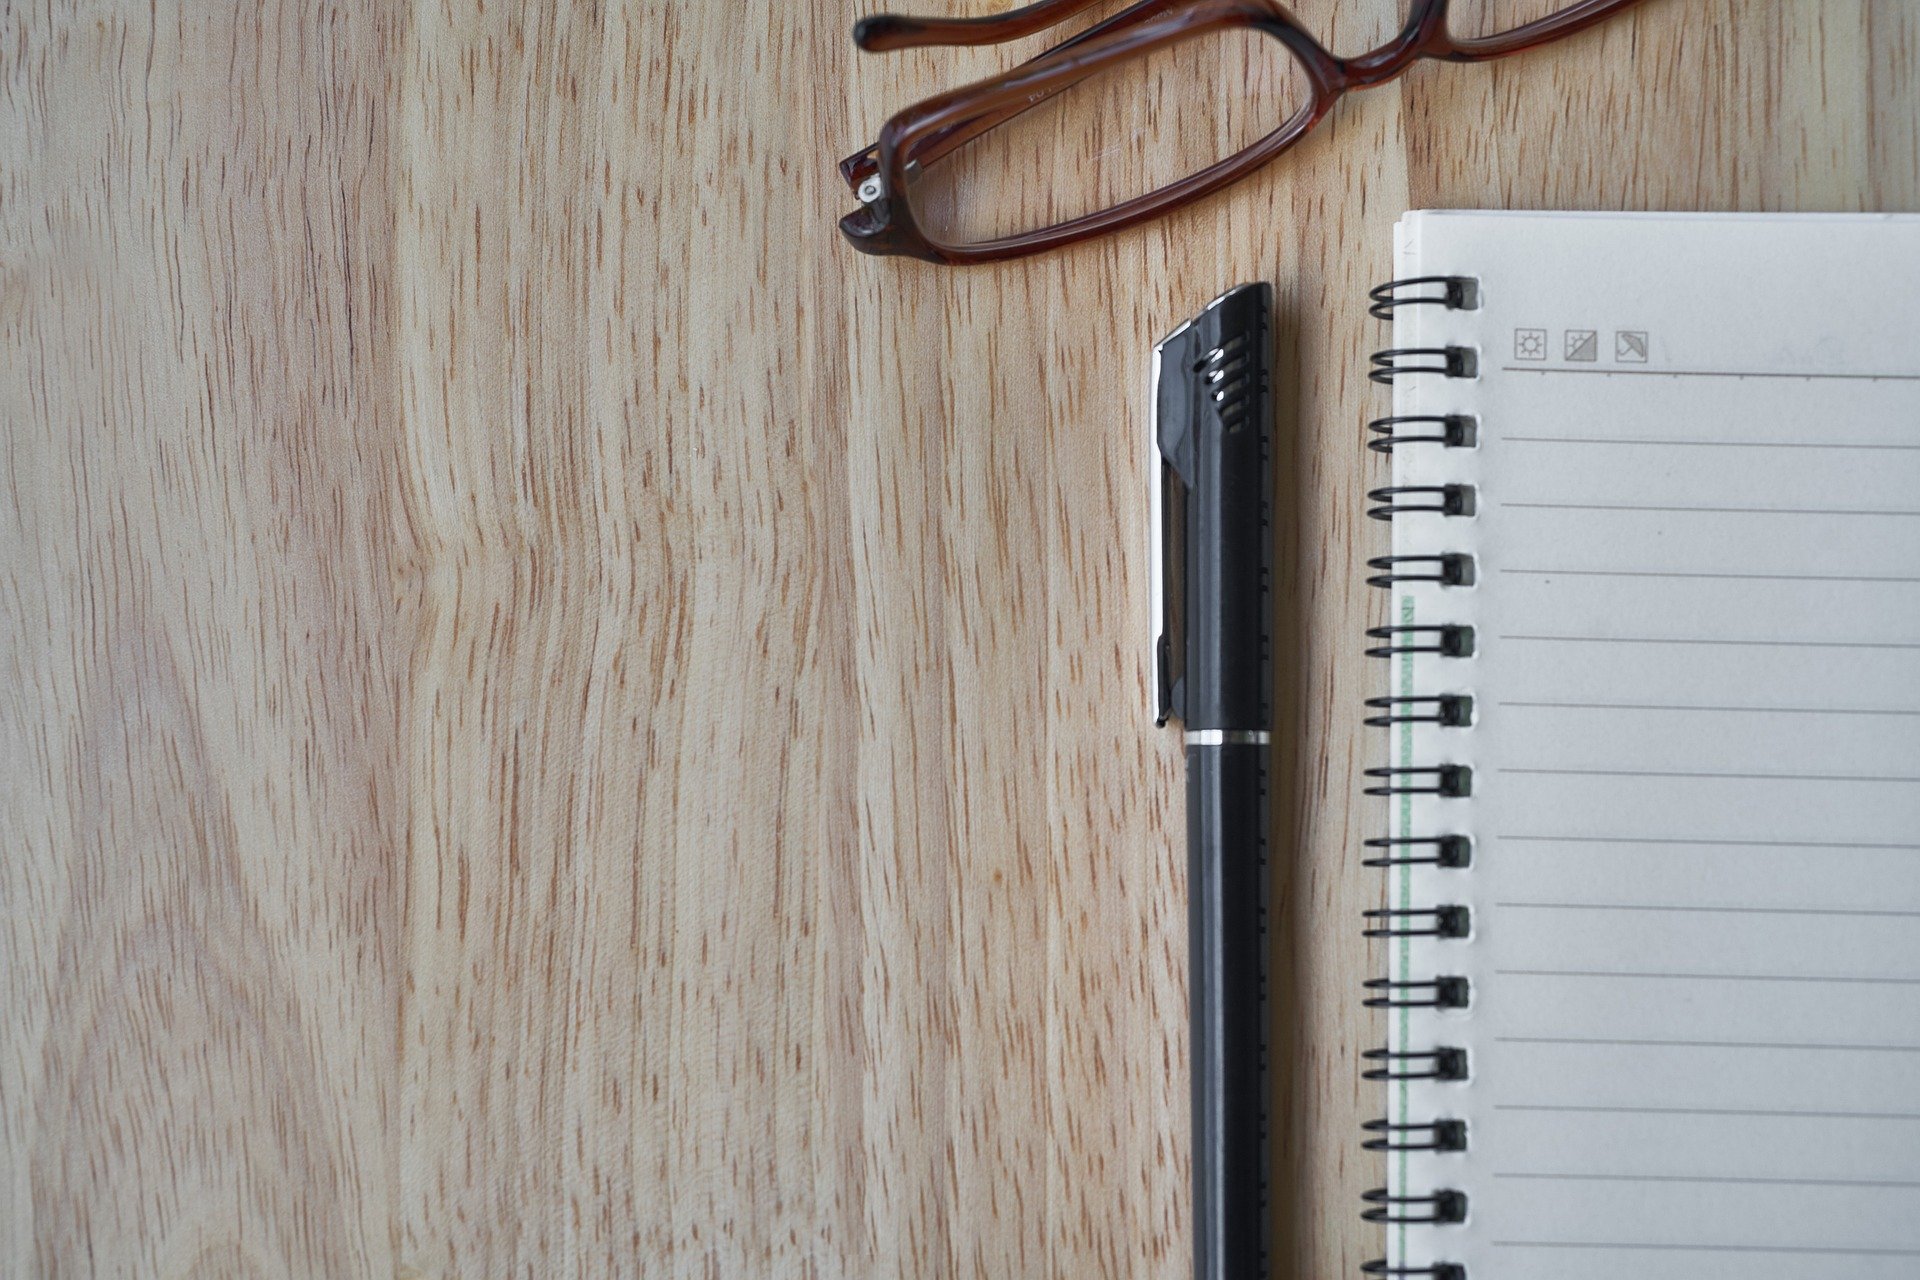 Notebook glasses and pen